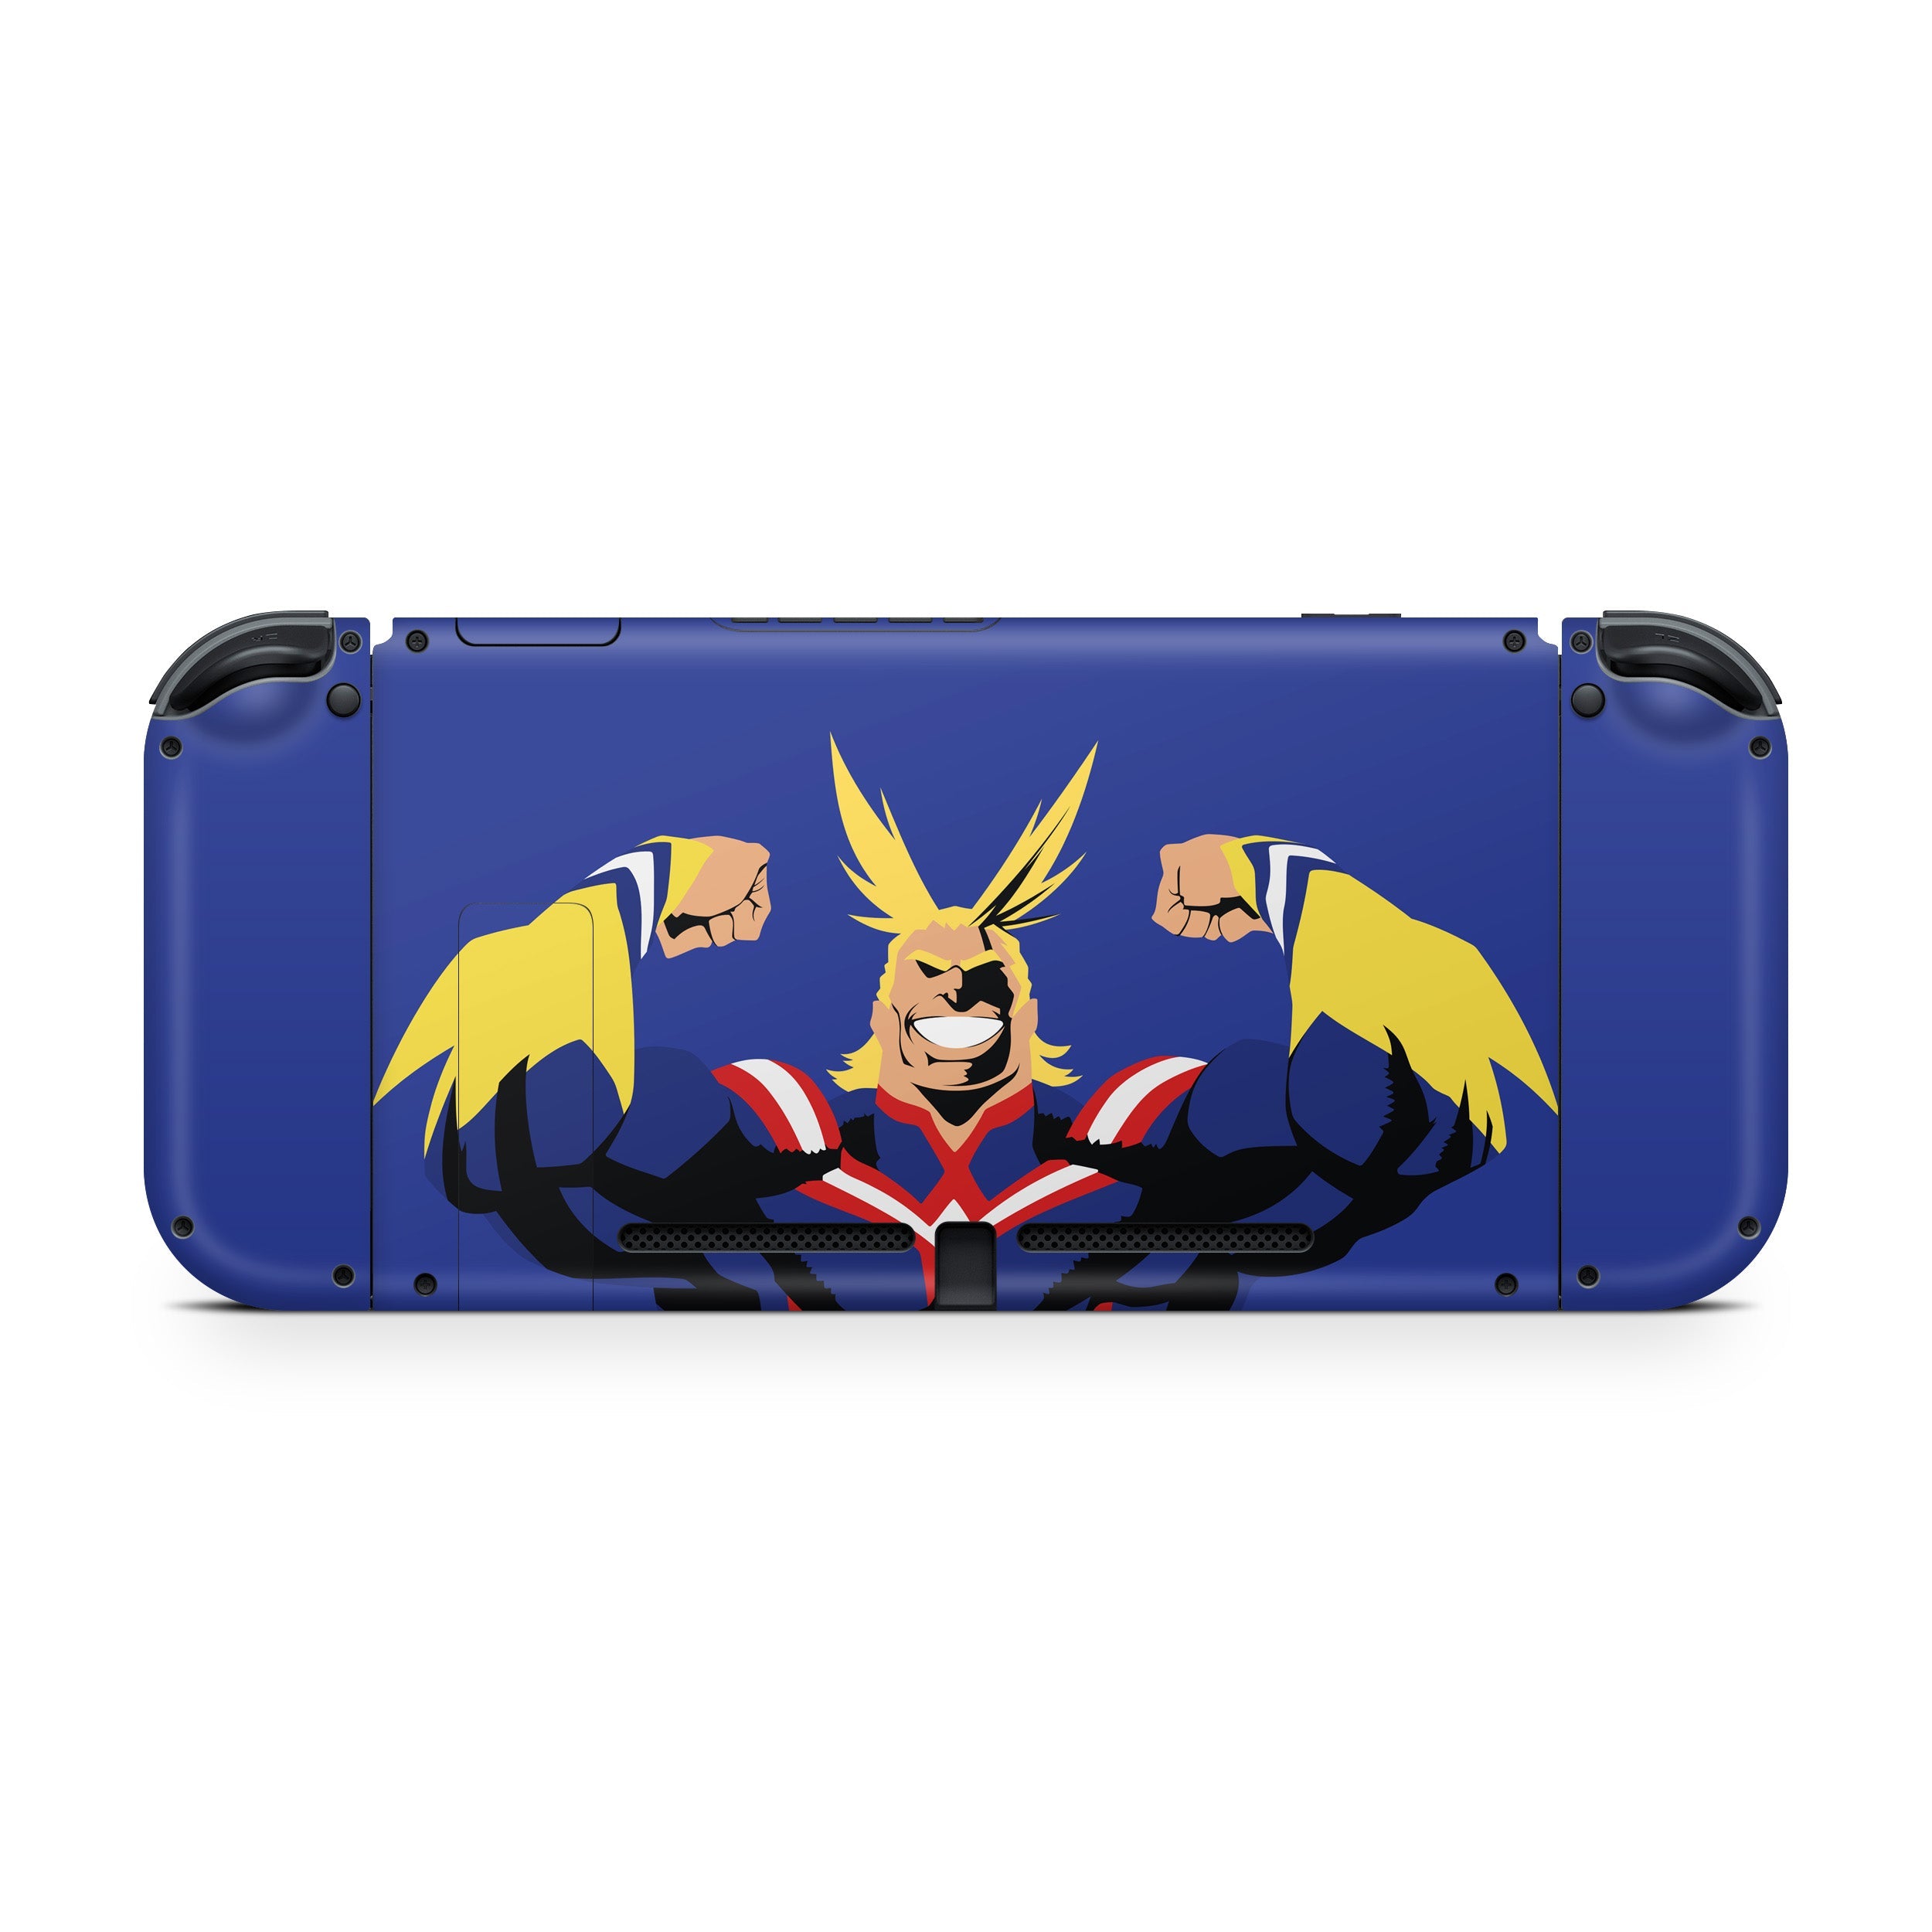 A video game skin featuring a My Hero Academia All Might design for the Nintendo Switch.